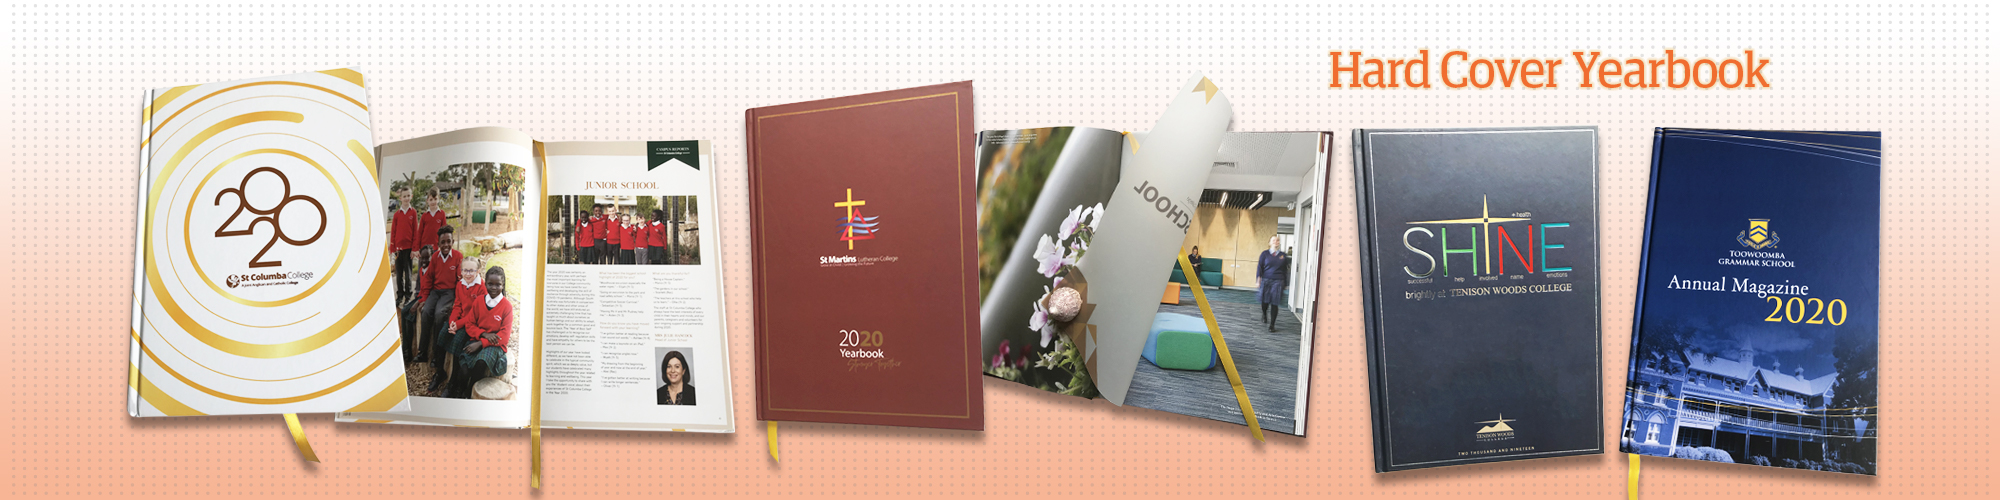 Homepage-Banner-Hard-Cover-Yearbooks-1